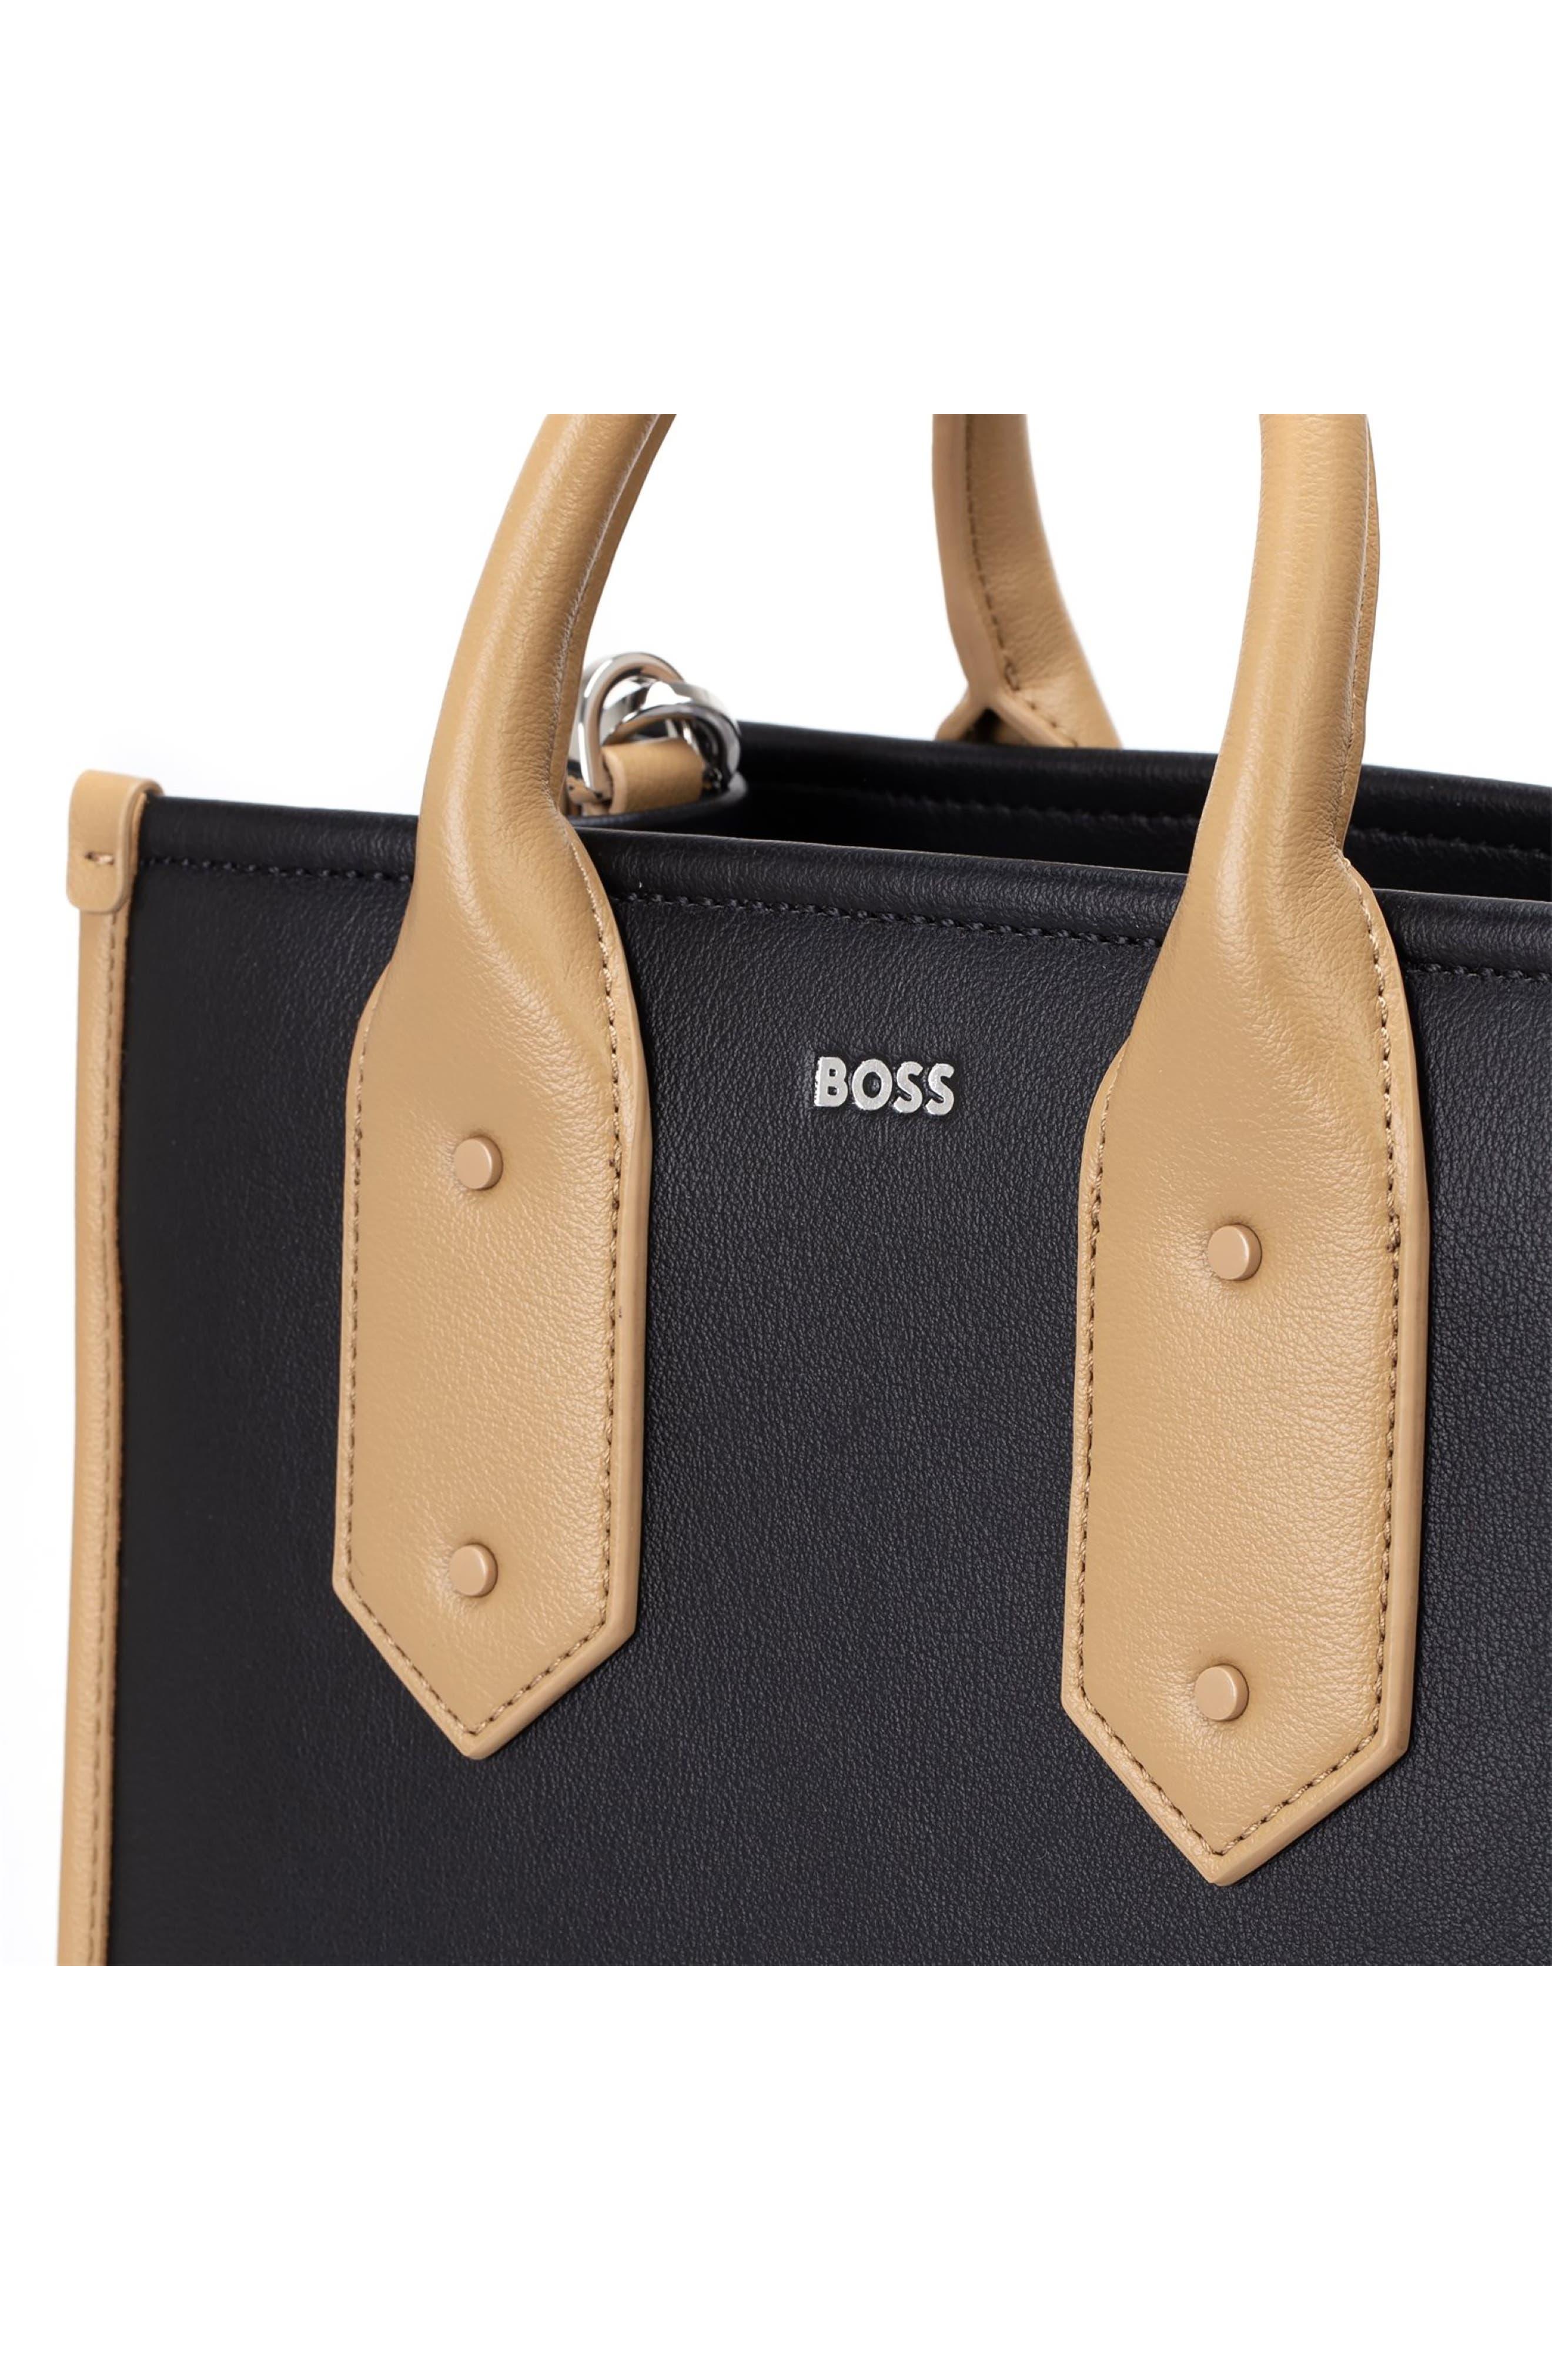 Kait's Purse | This is my fantastic Hugo Boss purse I bought… | Flickr